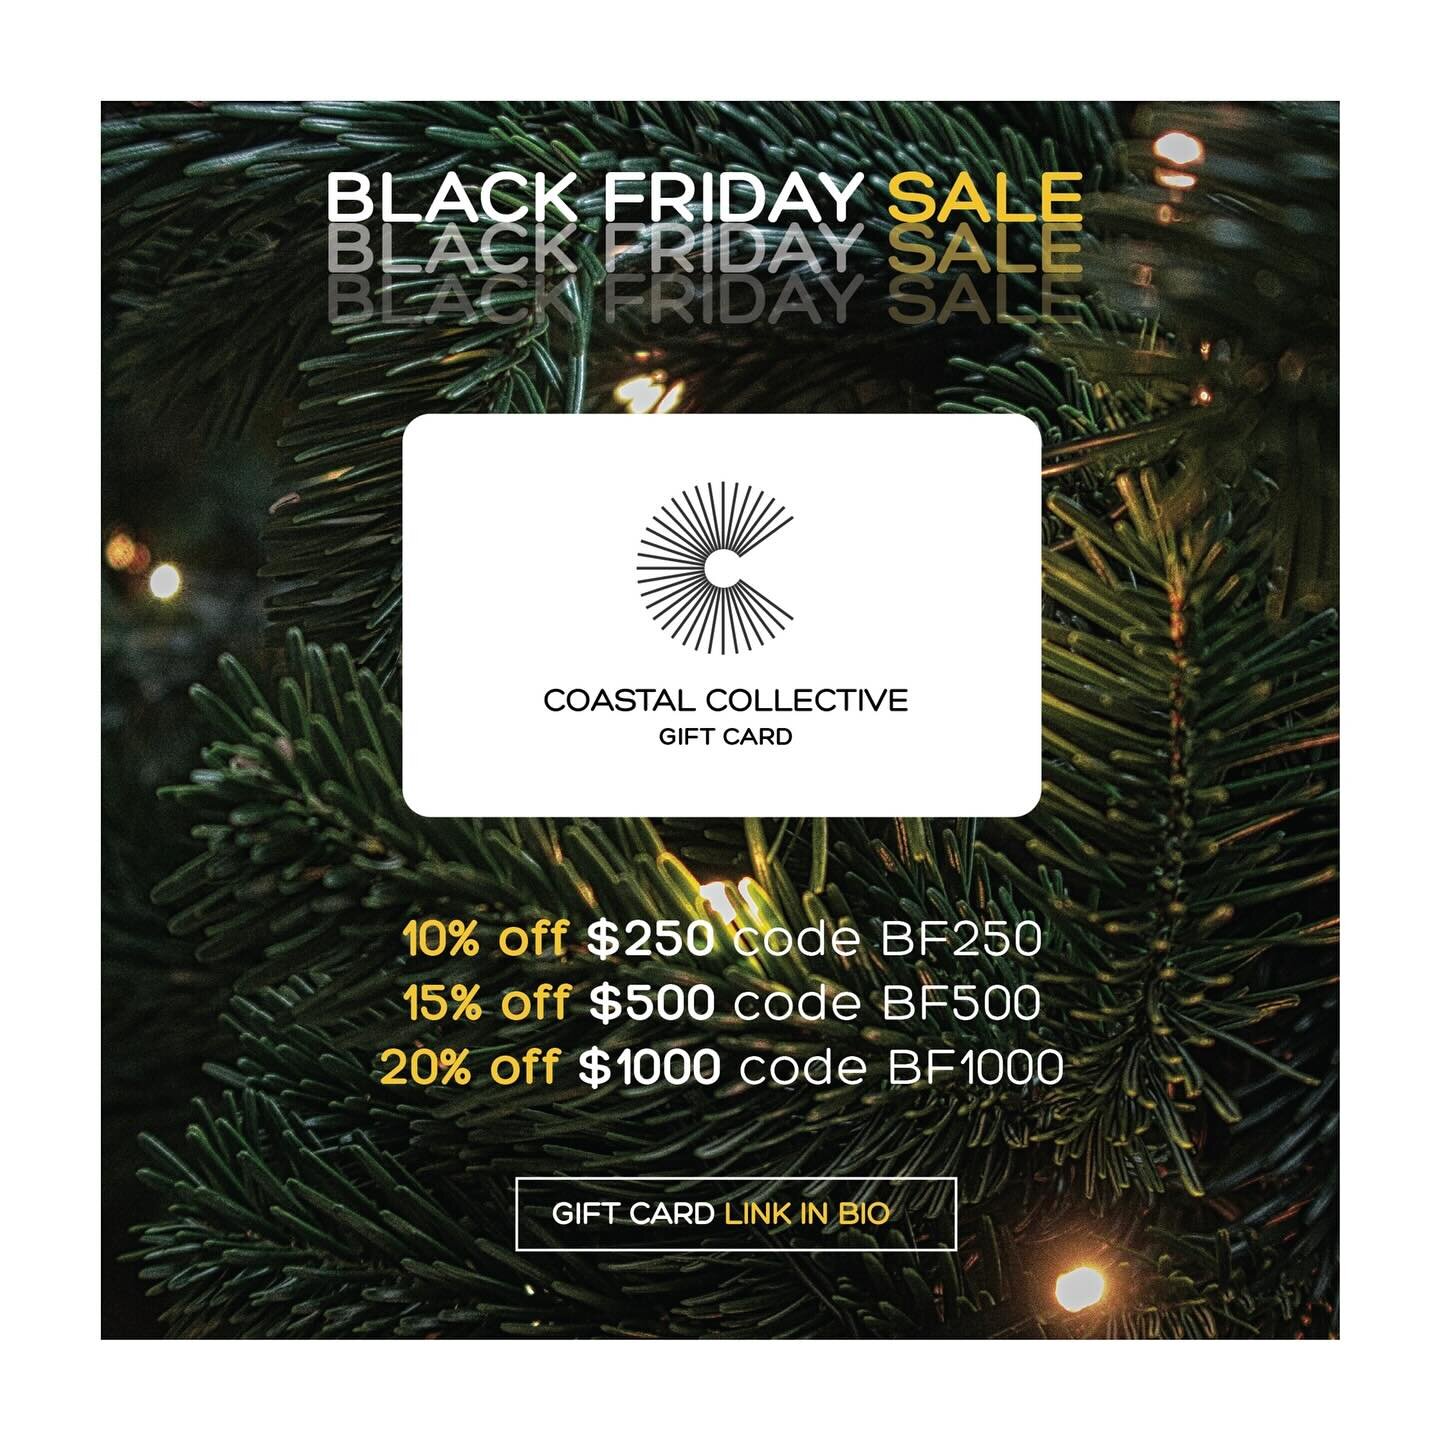 🚨 BLACK FRIDAY GIFT CARDS ARE LIVE!! 

▪️Buy a gift card for $250 and get 10% off (use promo code BF250)

▪️Buy a gift card for $500 and get 15% off (use promo code BF500)

▪️Buy a gift card for $1000+ and get 20% off (use promo code BF1000)

◼️The 